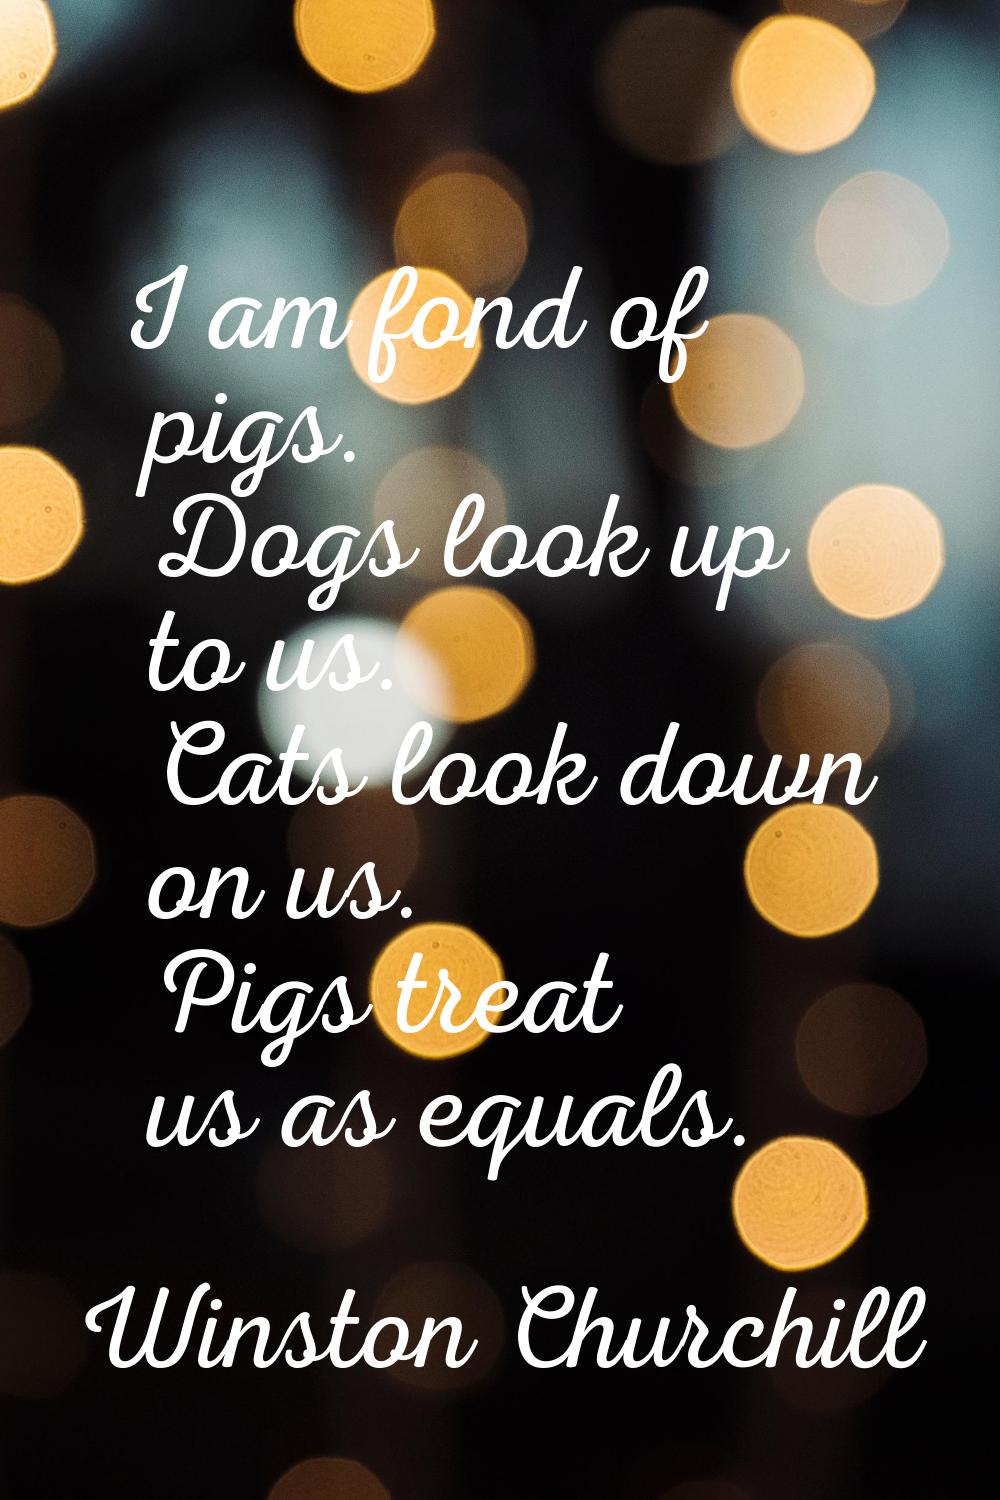 I am fond of pigs. Dogs look up to us. Cats look down on us. Pigs treat us as equals.